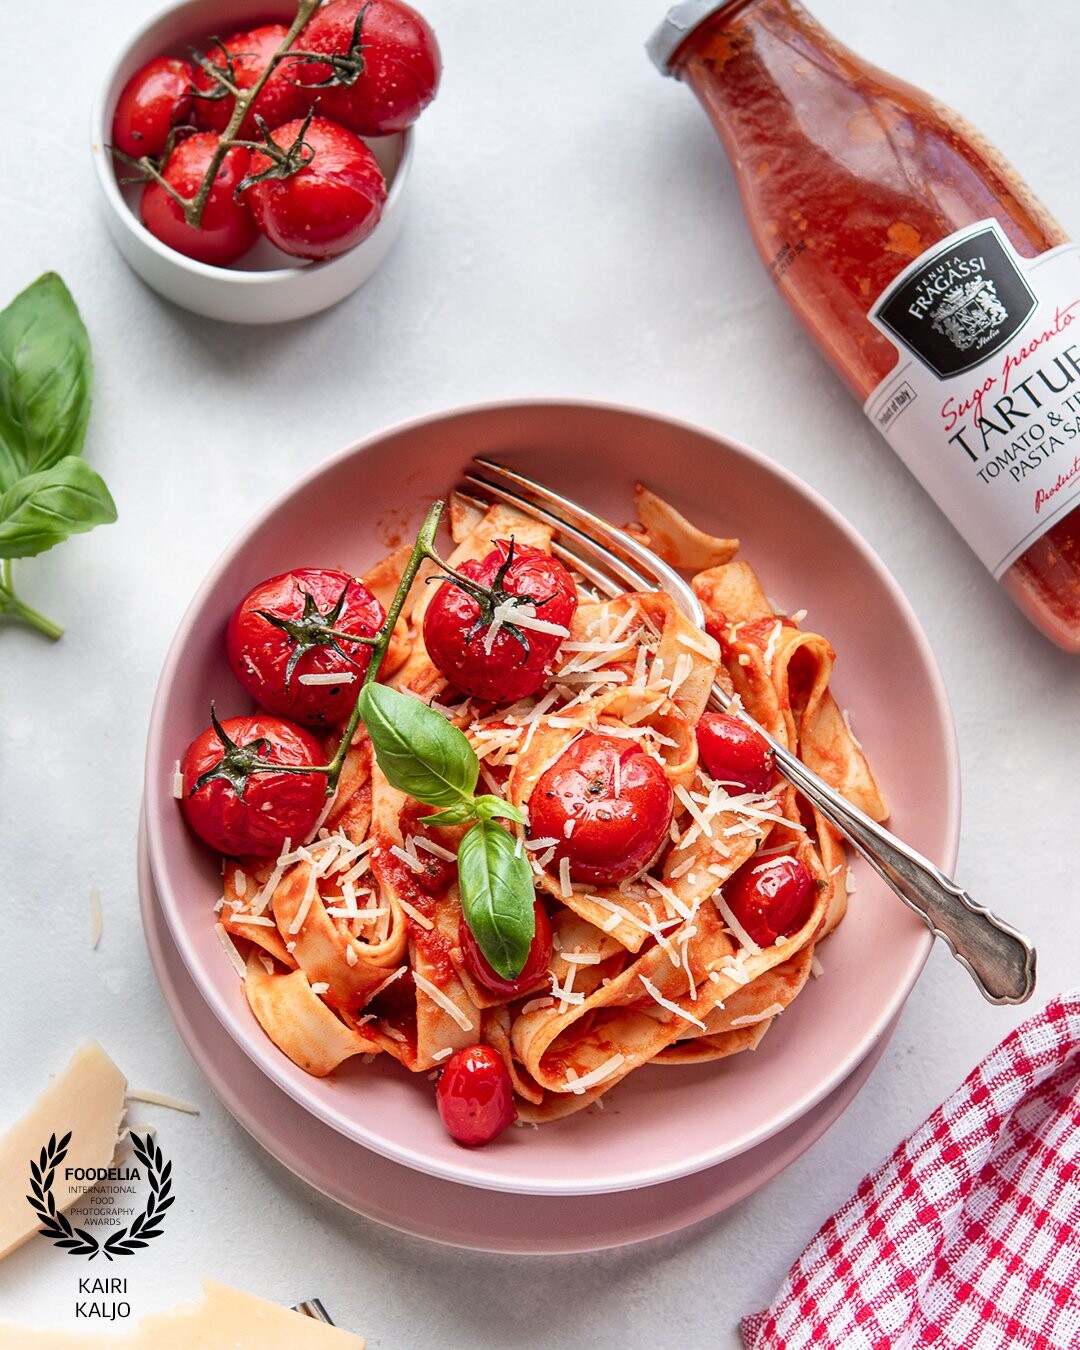 There are many ways to eat pasta and so many different sauces you can enjoy it with but sometimes the most simplest things, in this case a simple tomato sauce,  makes the best pasta.